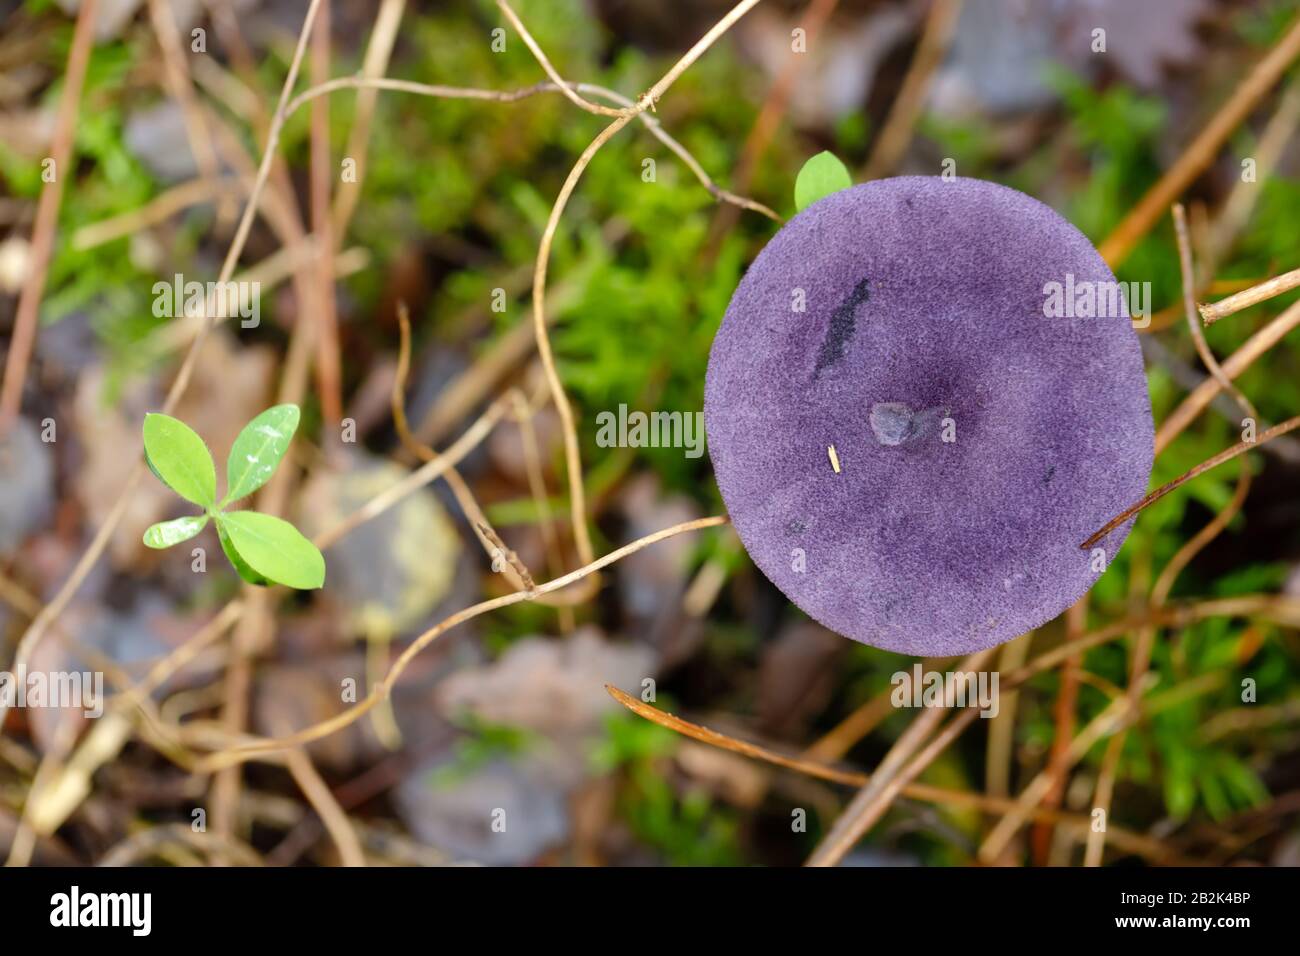 top view of a Violet Webcap mushroom growing in the wet moss of a temperate forest. Stock Photo